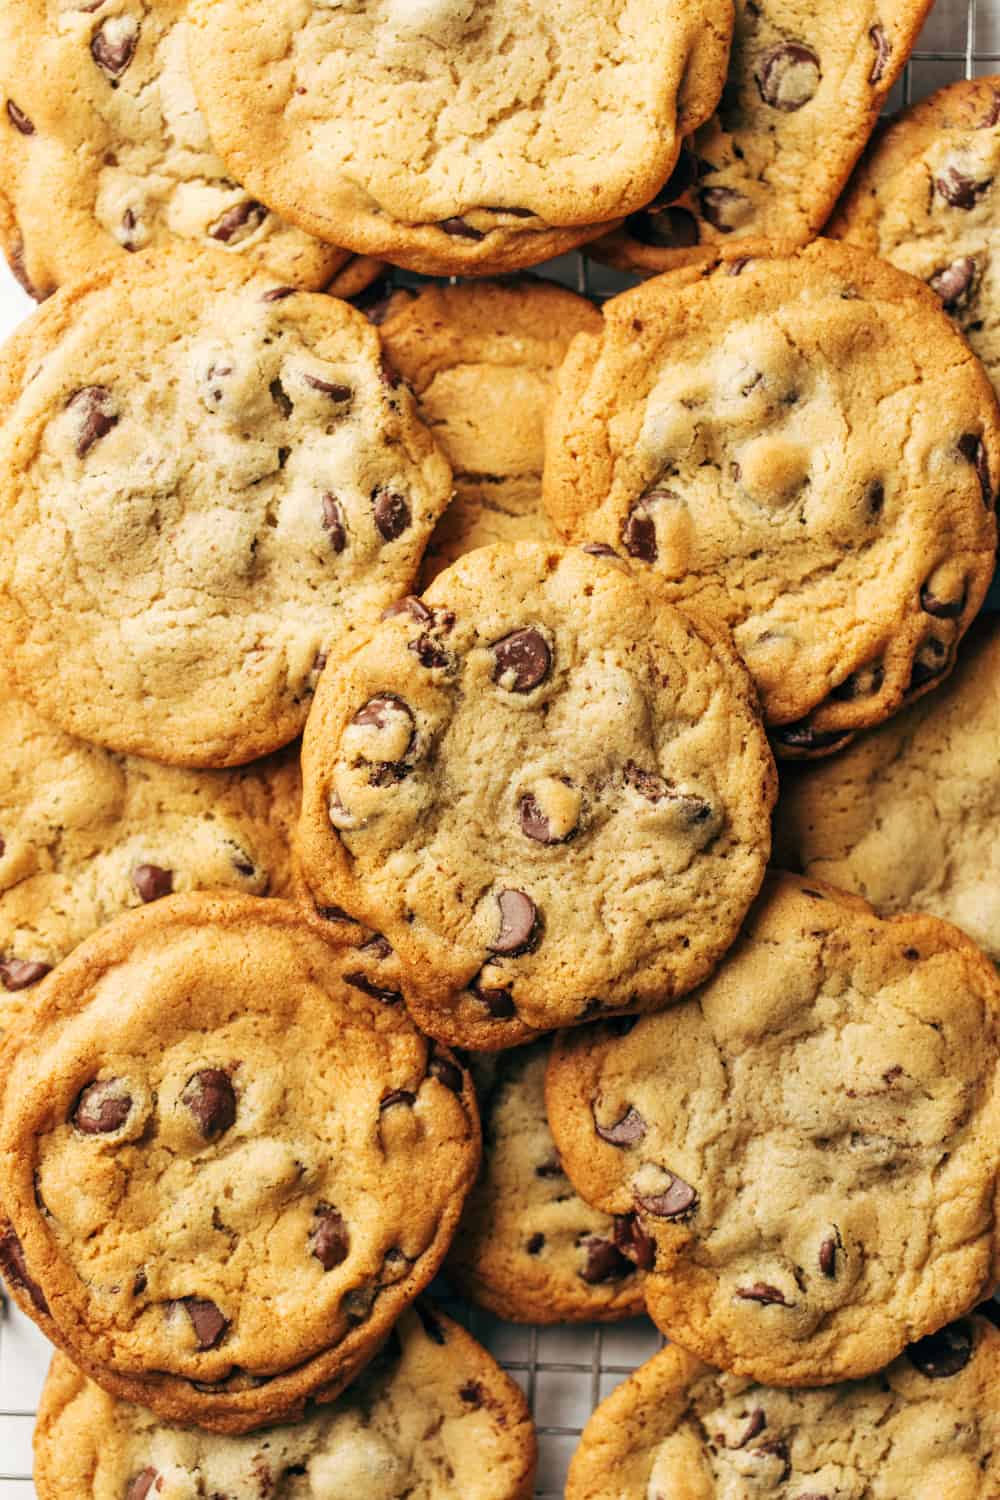 My favorite chocolate chip cookies are big, dense, chocolatey and chewy. This New York Times chocolate chip cookie recipe is truly the best – I am yet to try a better cookie!